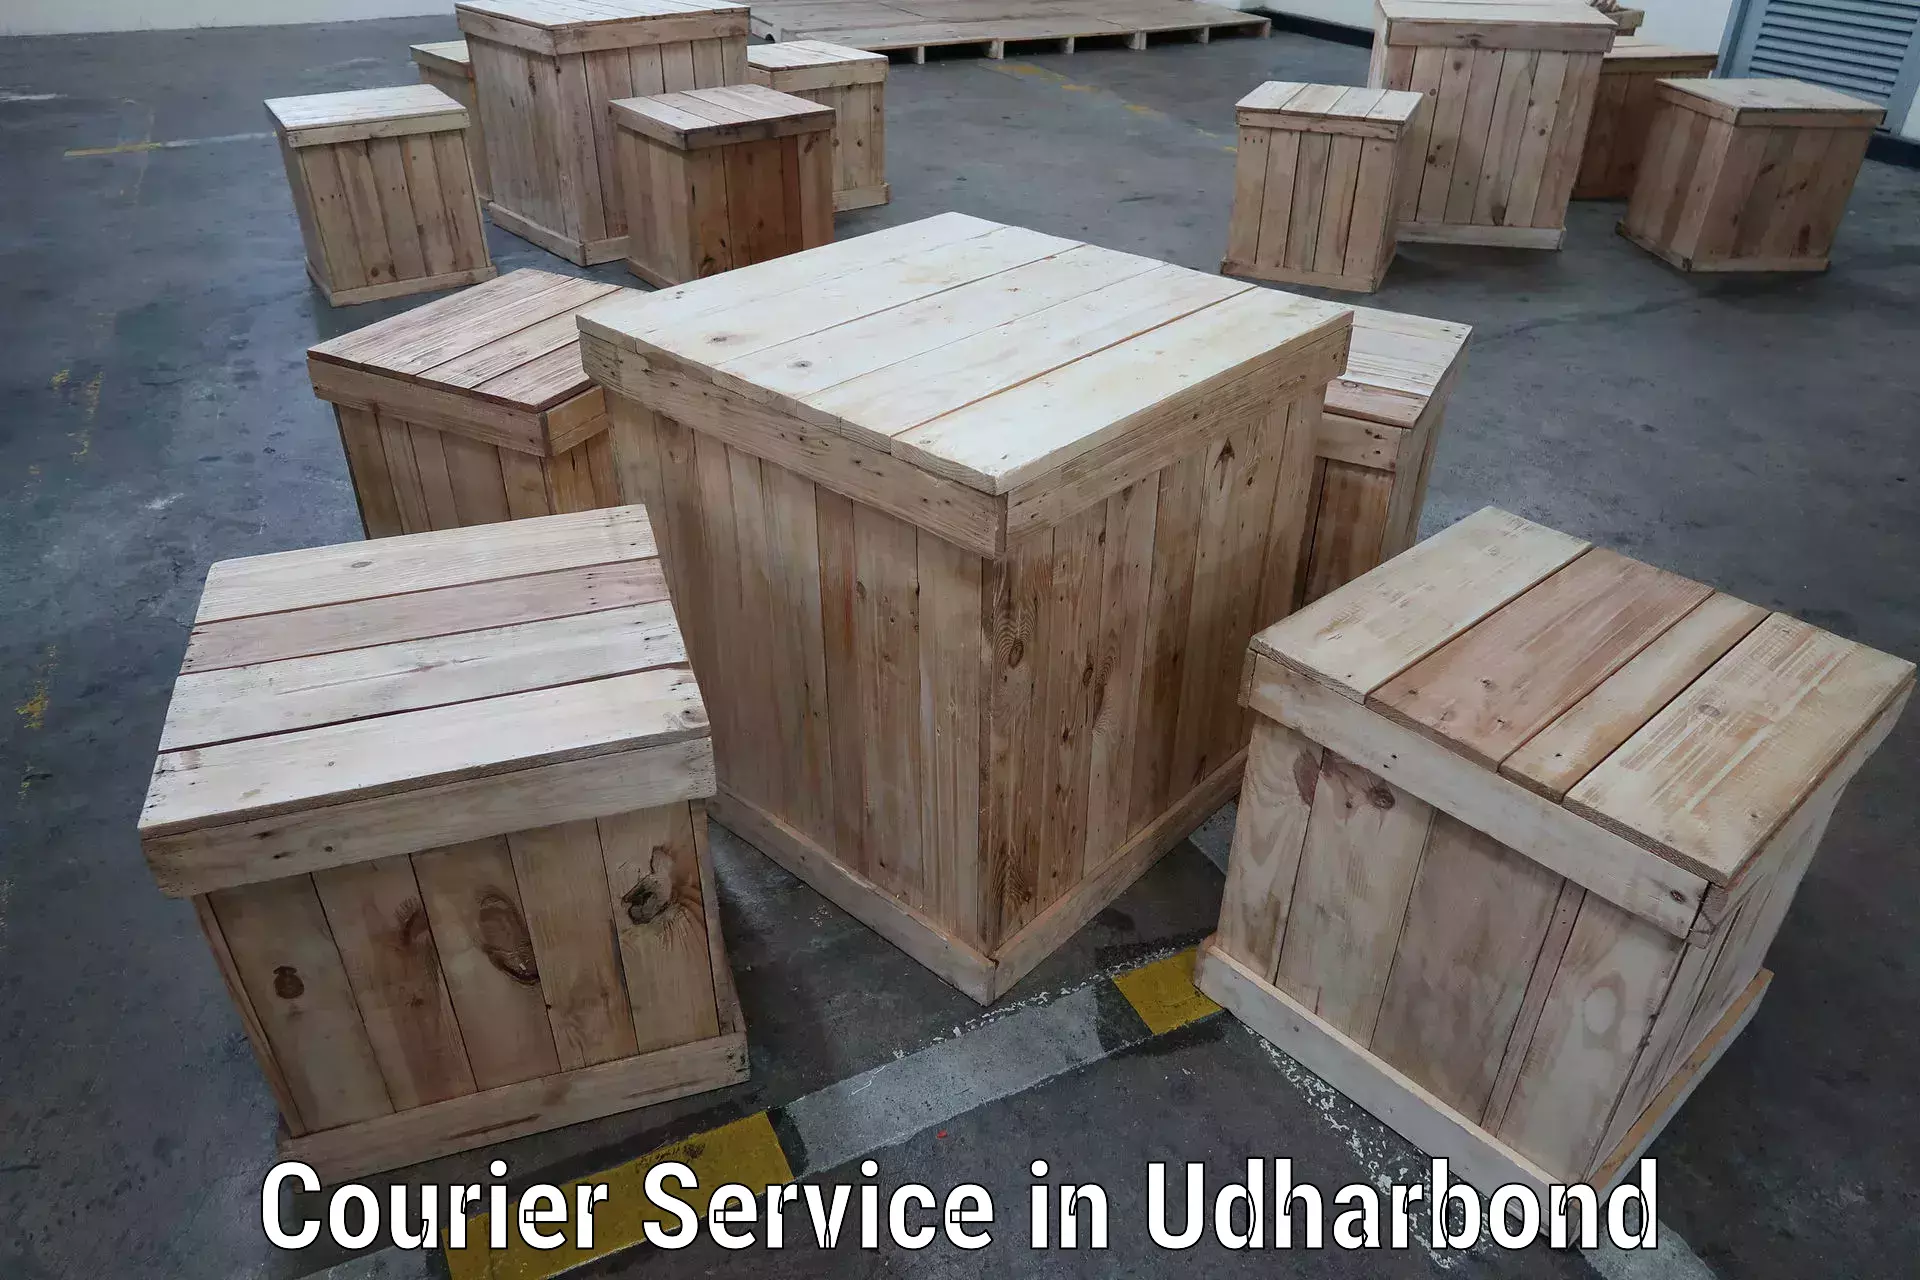 E-commerce logistics support in Udharbond